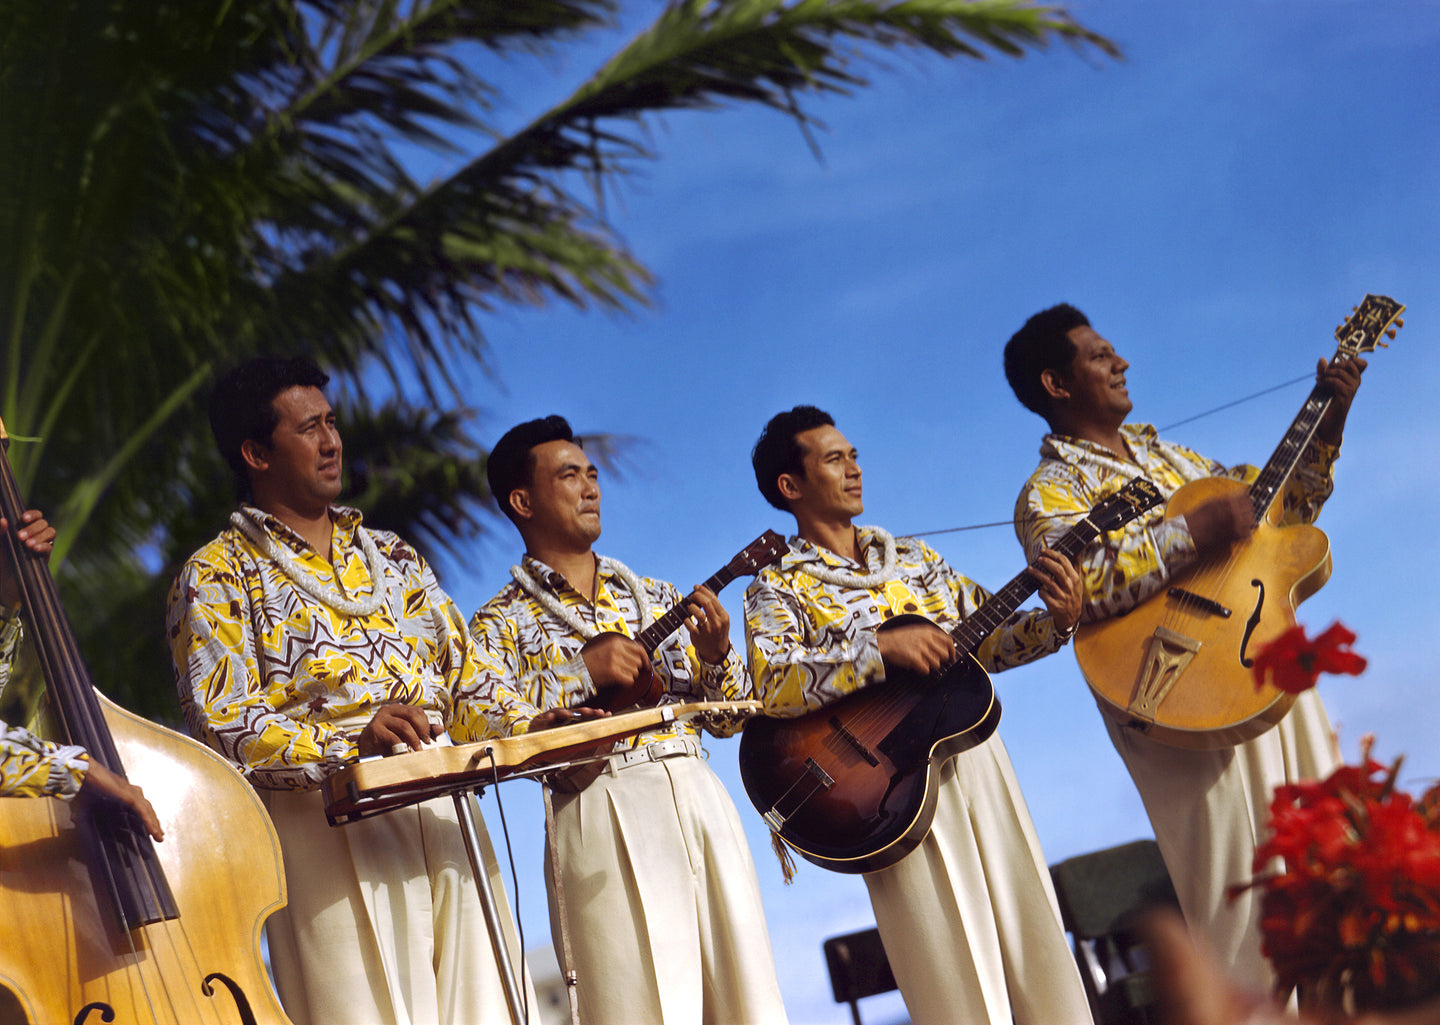 Color photograph of musicians and playing their instruments outdoors. 5 instruments and 4 musicians are pictured. 4 men wearing white pants and matching patterned shirts and leis under a blue sky with a palm tree in background to the left.